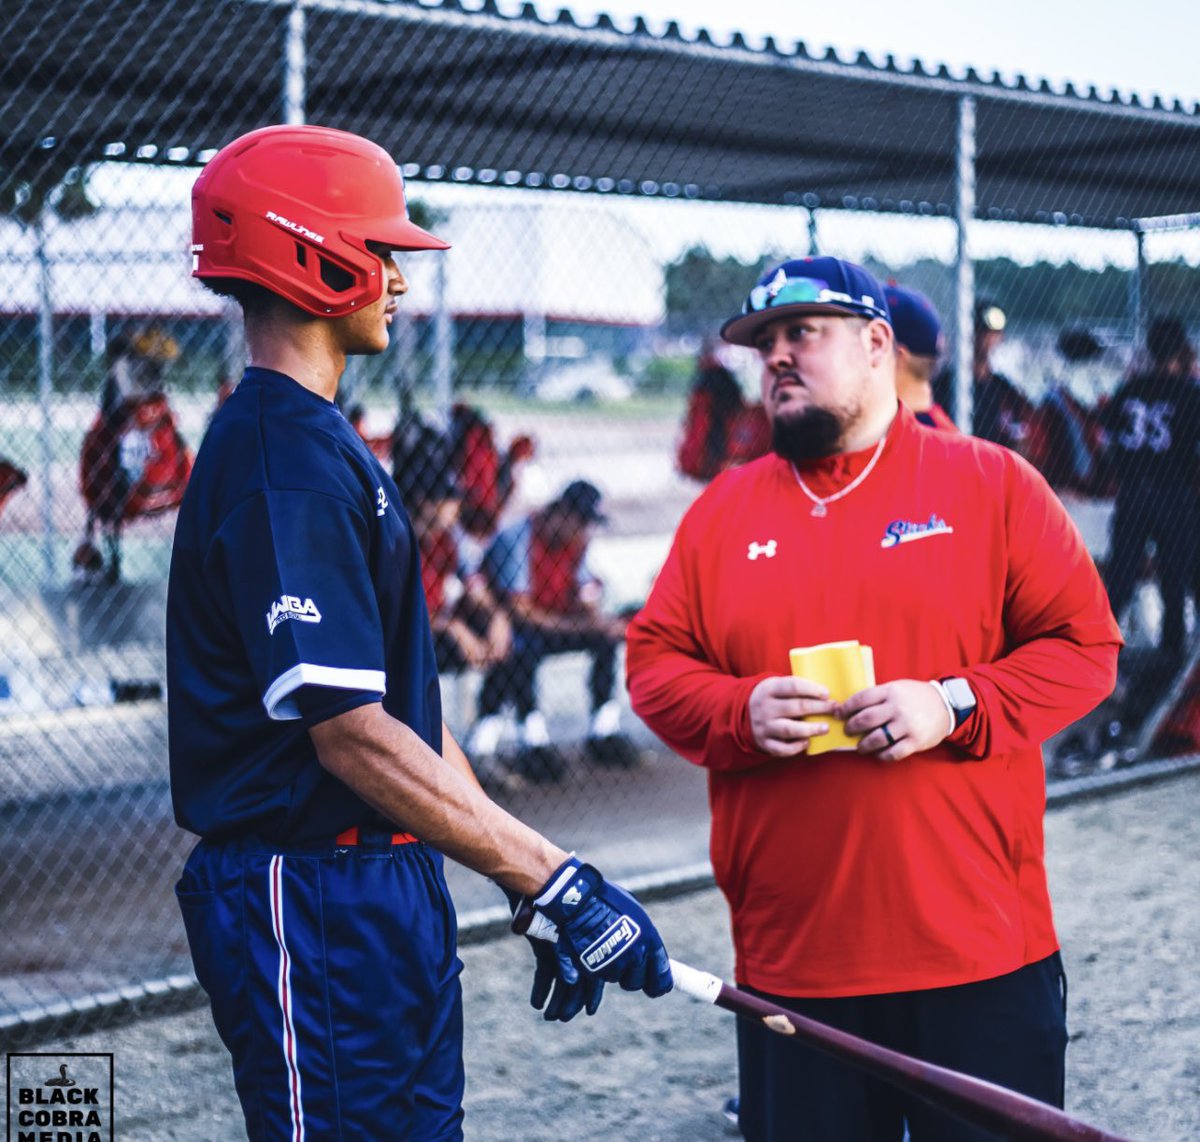 Happy birthday to one of the best in the business! Hope it’s a great one coach!✊🏽 @Brewsterc29